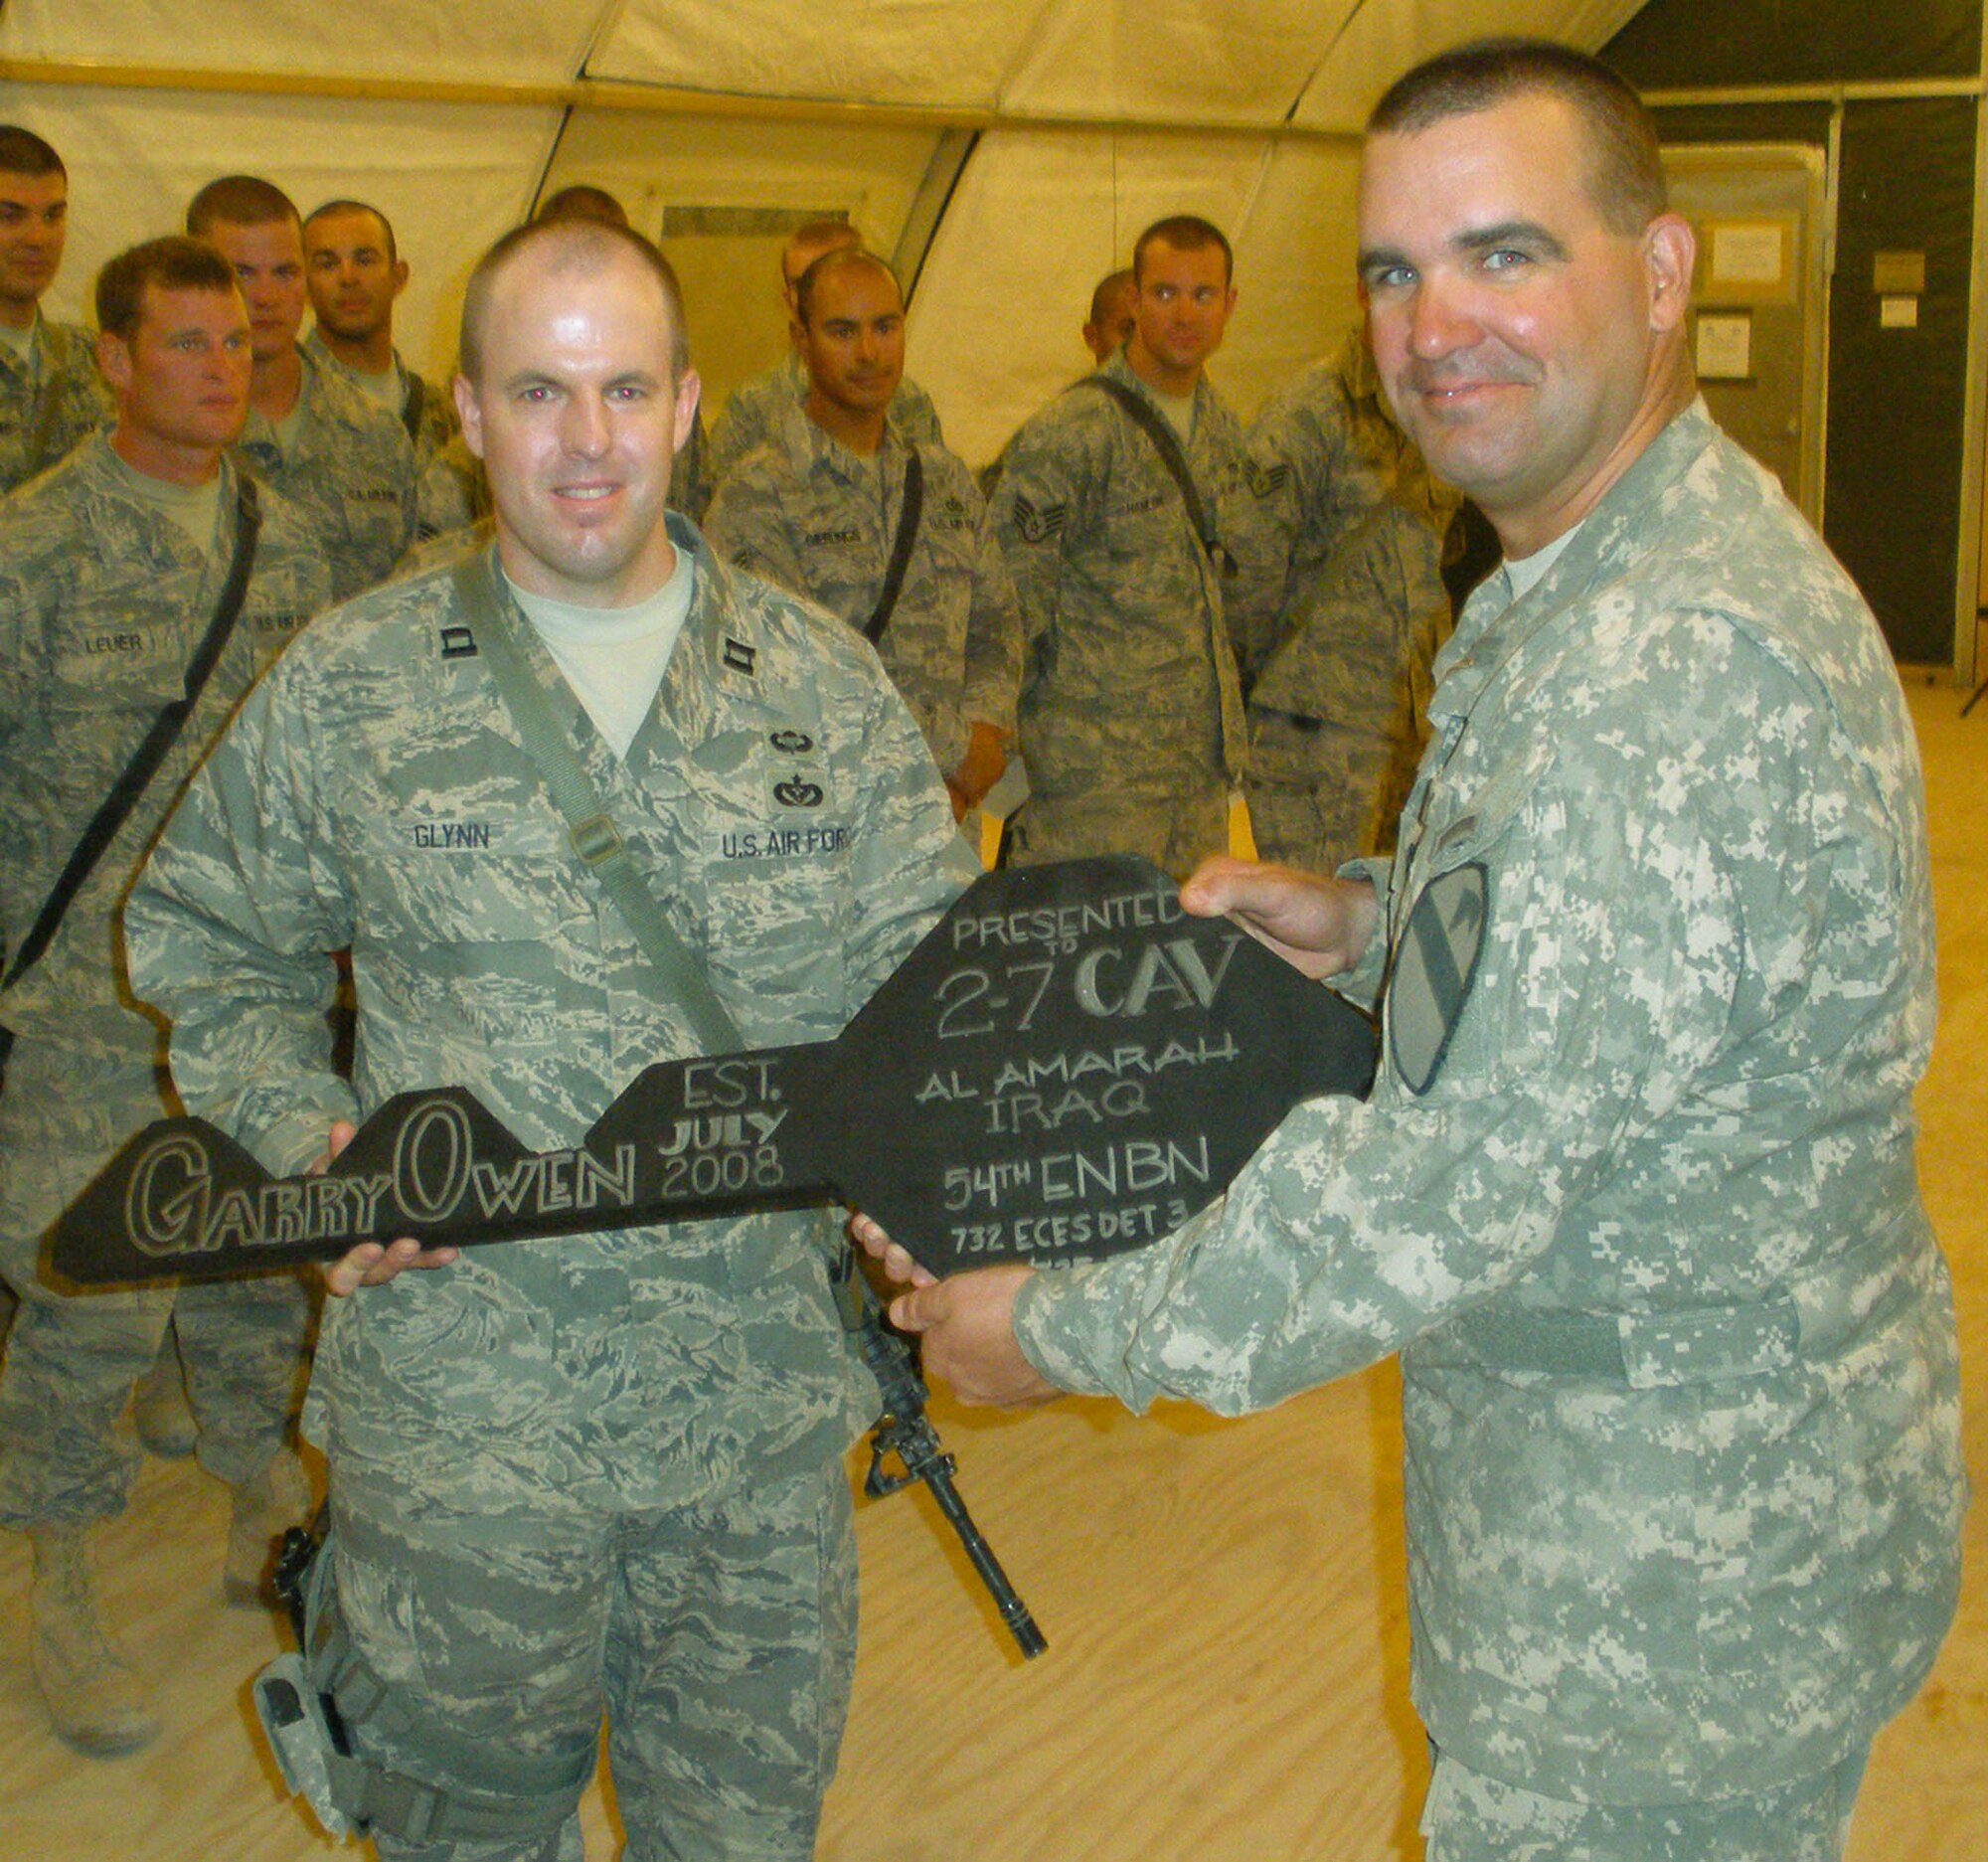 Lt. Col. Edward Bohnemann, 2nd Battalion, 7th Cavalry Regiment's commander, gives the key to the base to U.S. Air Force Capt. Glynn and the 25 Airmen of the 1st Bn., 535th Equipment Support Company,1st Bn., 535th Equipment Support Company, Aug. 8. (U.S. Army photo by 1st Lt. Dave Collins, 2nd Bn., 7th Cav. Regt., 4th BCT, 1st Cav. Div.)